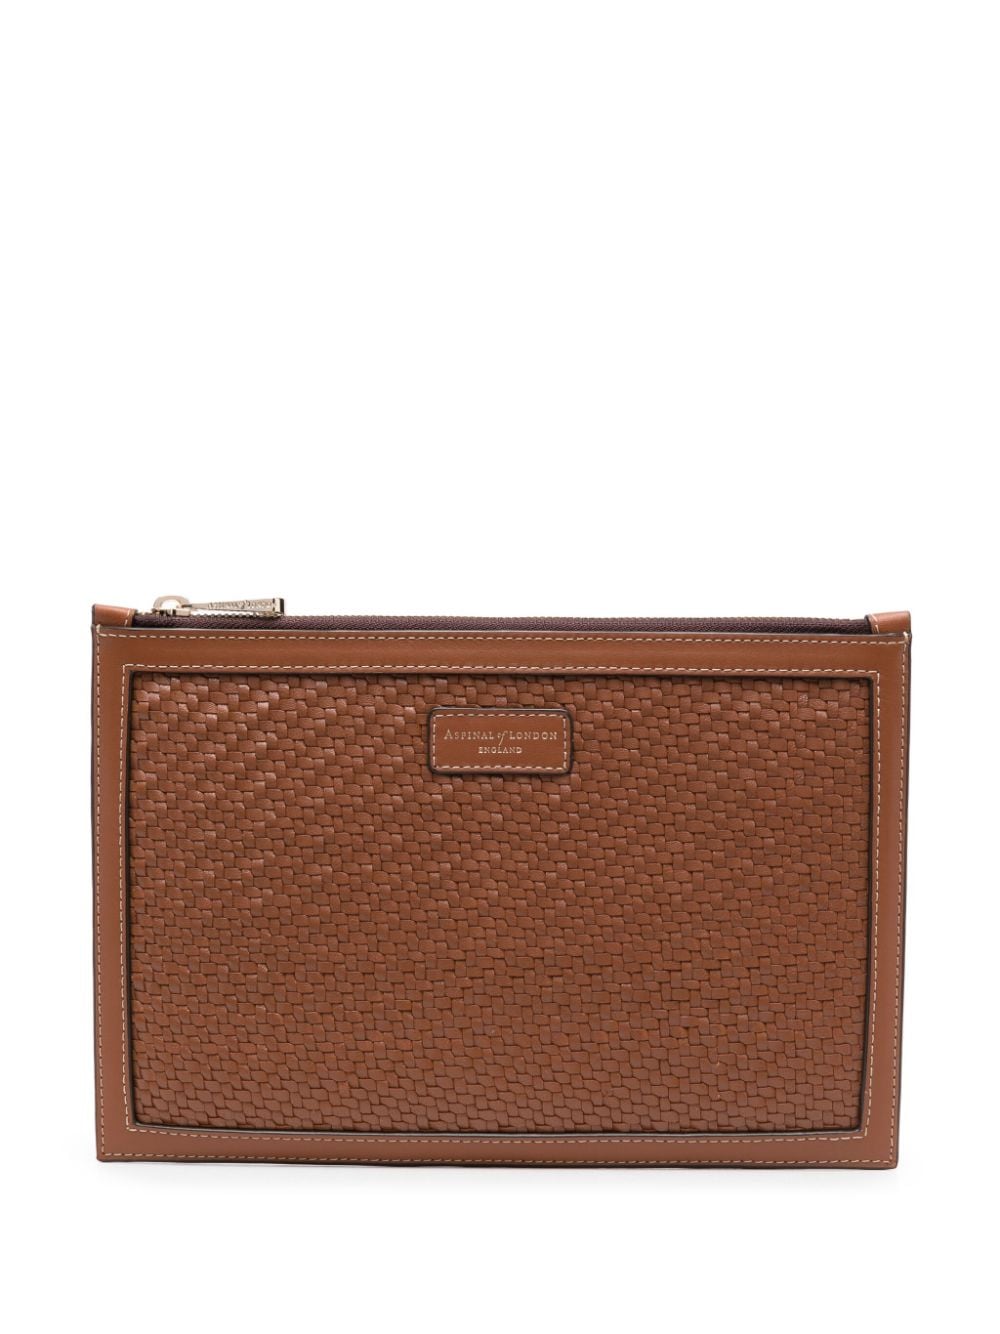 Aspinal Of London Large Essential Leather Clutch Bag In Braun